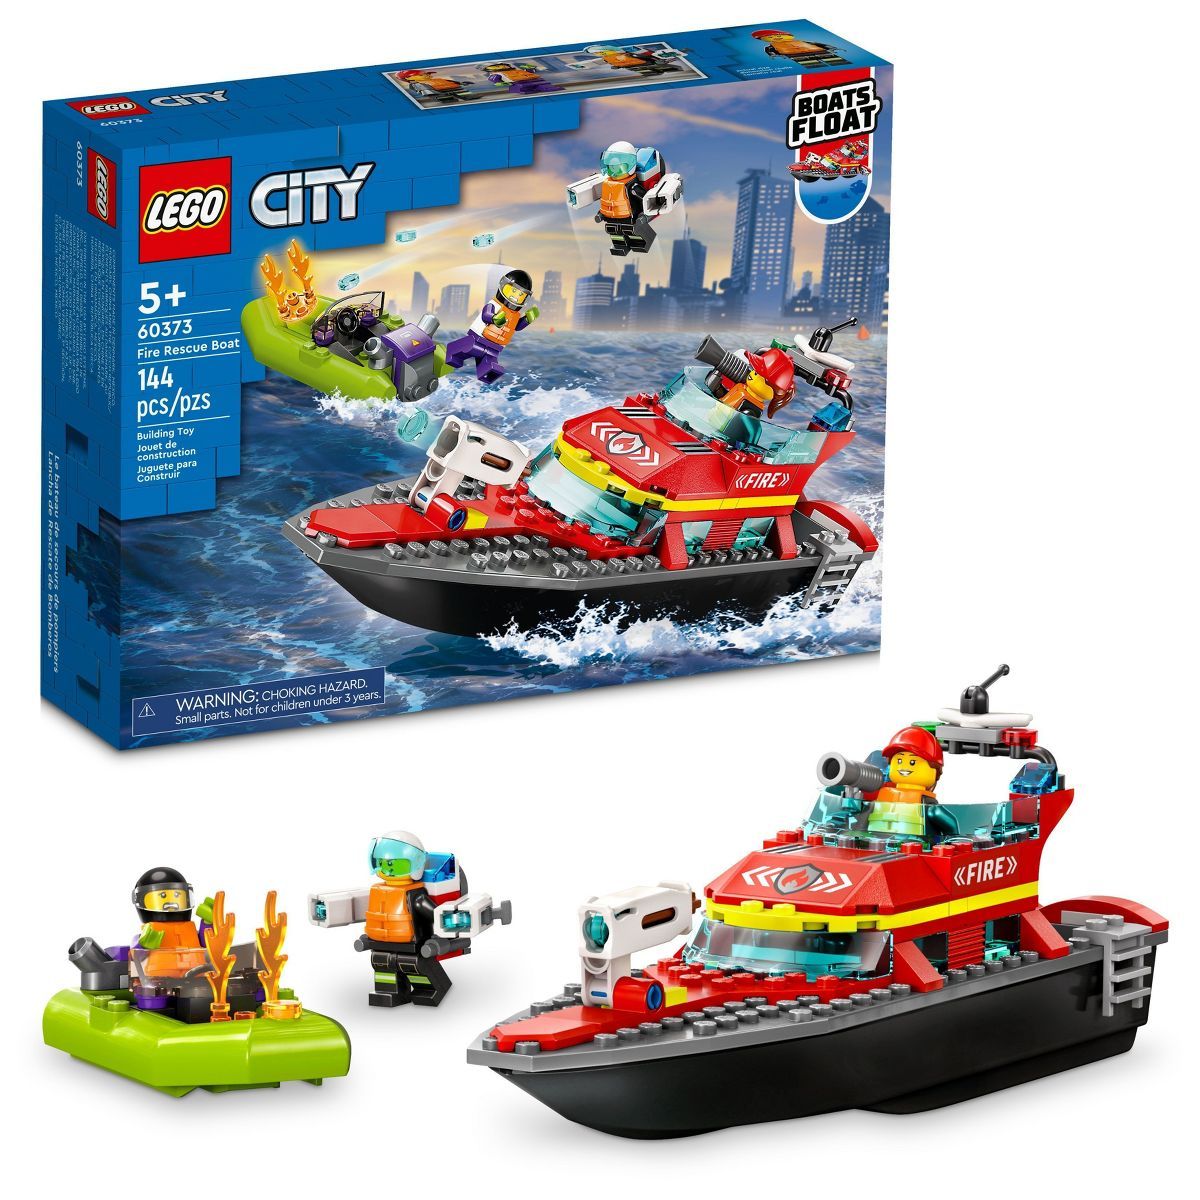 LEGO City Fire Rescue Boat Toy, Floats on Water Set 60373 | Target